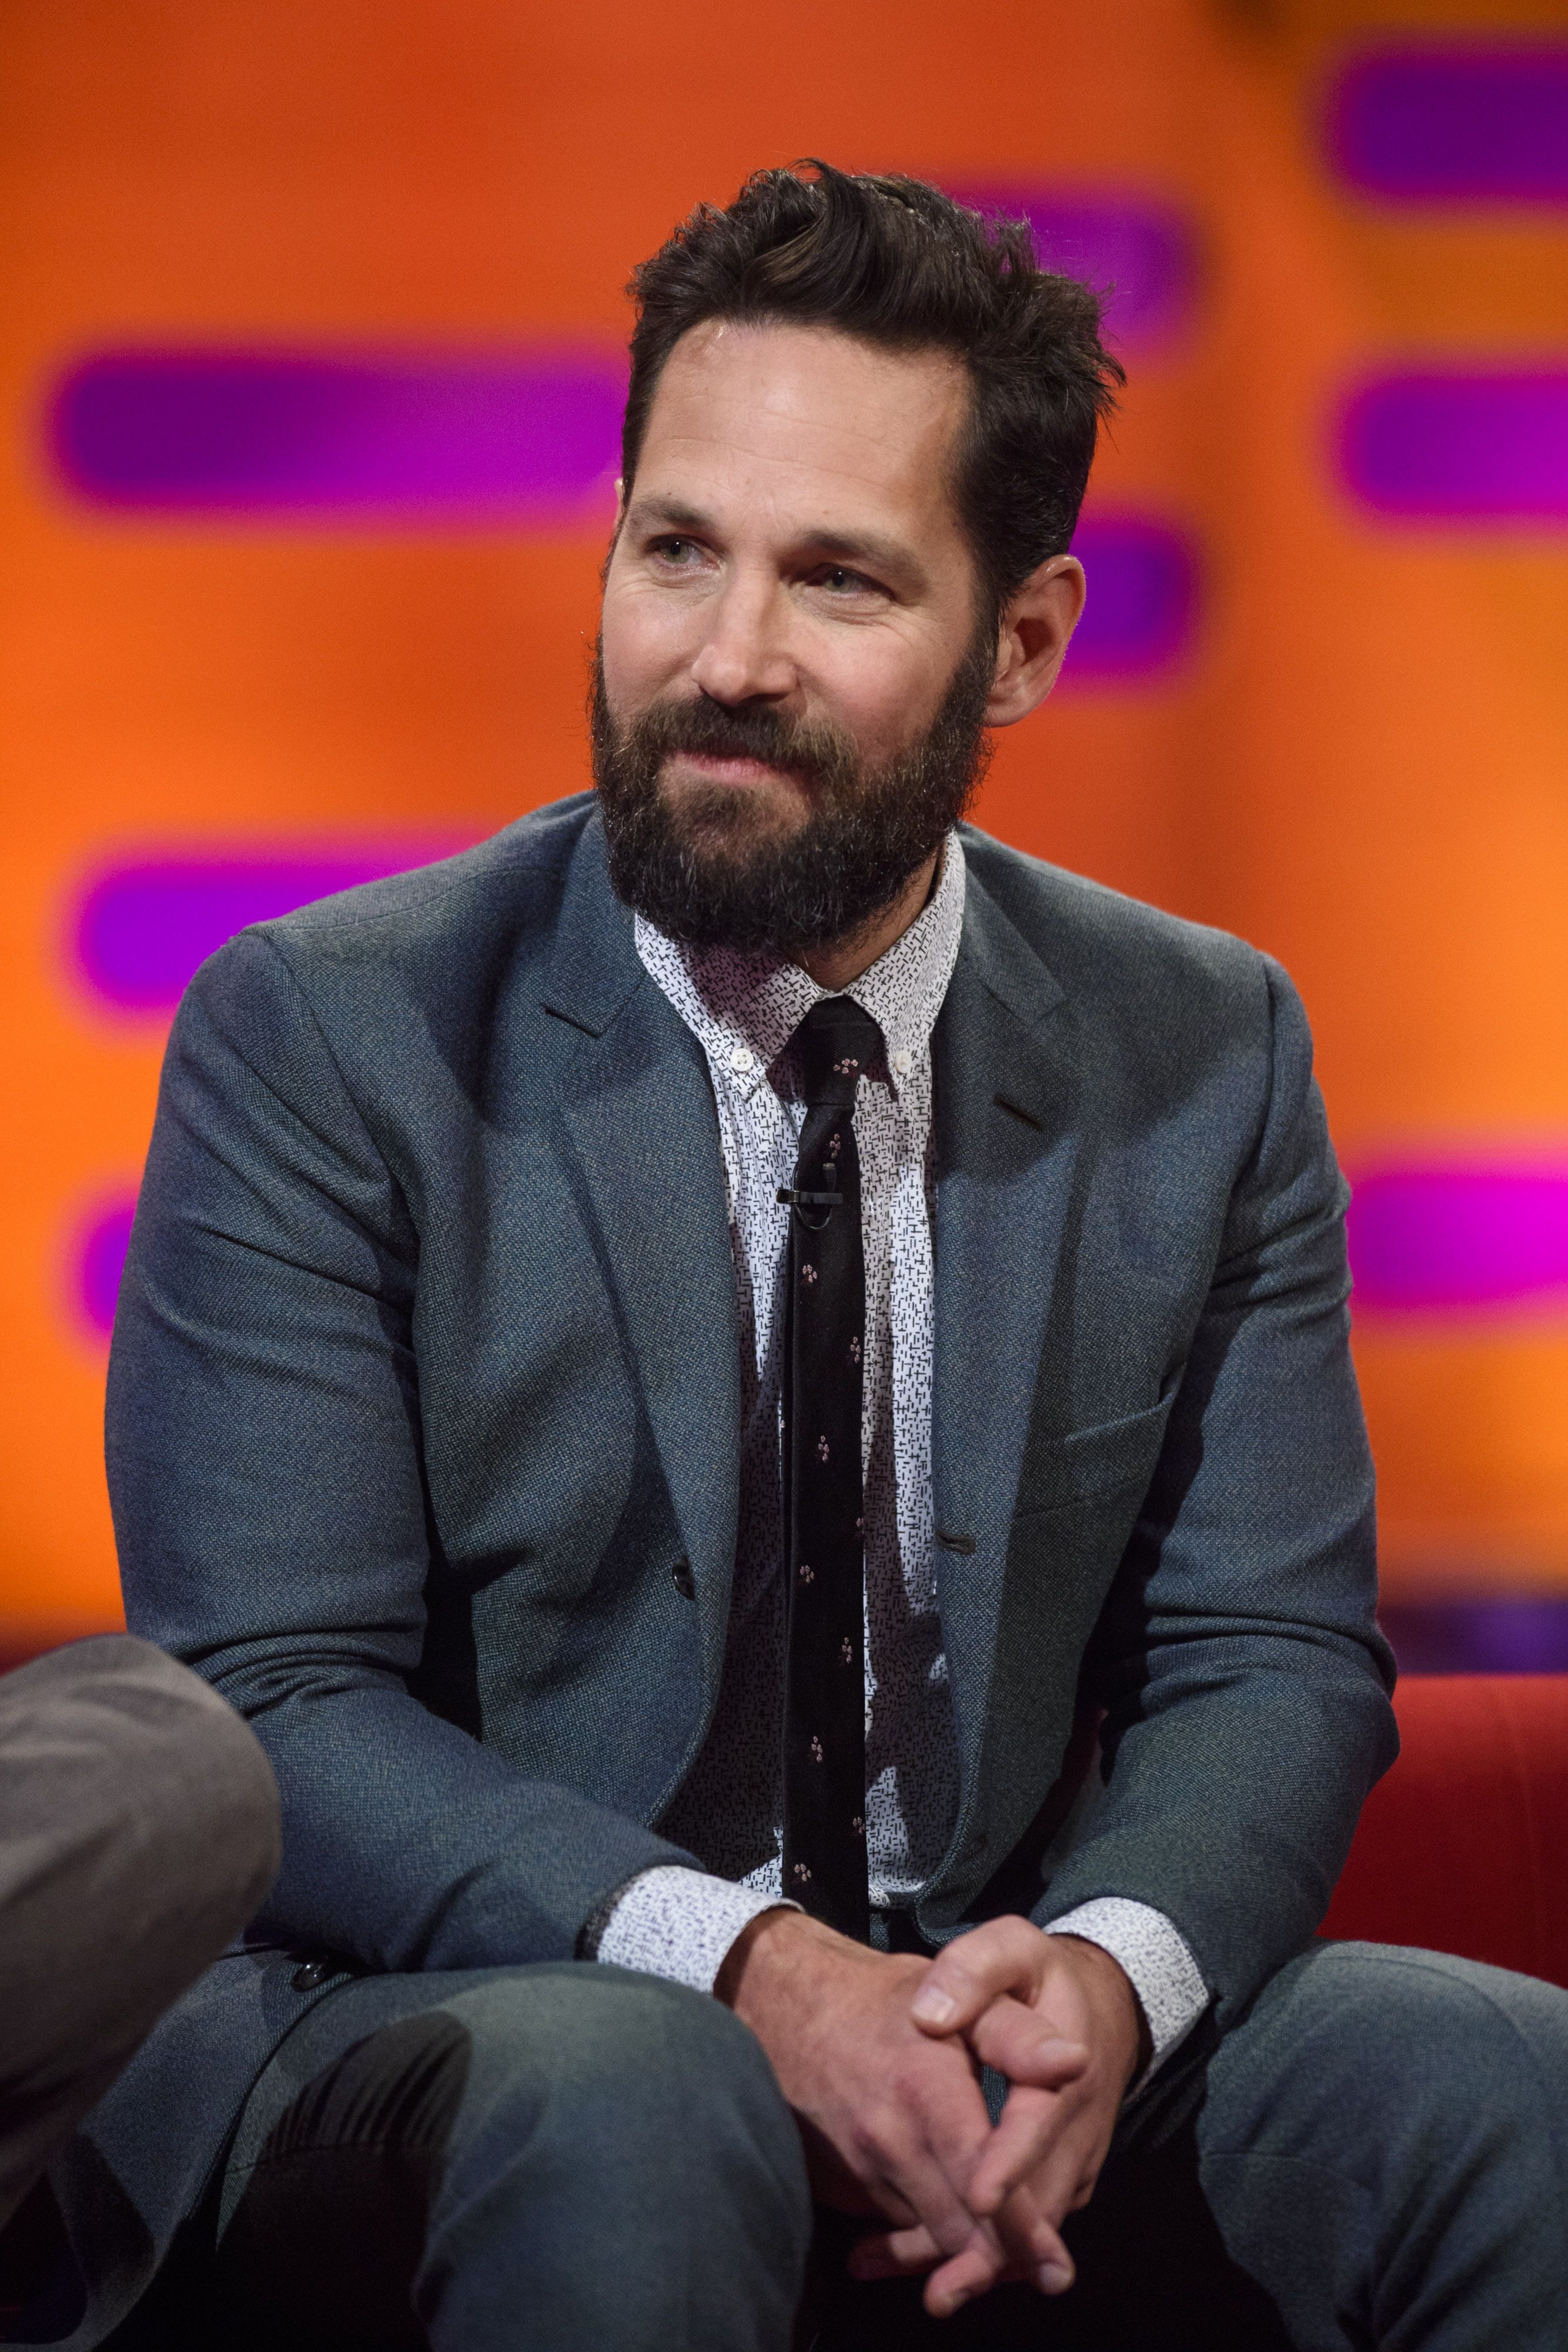 Paul Rudd Was Laughed At When He Was Cast As Ant-Man